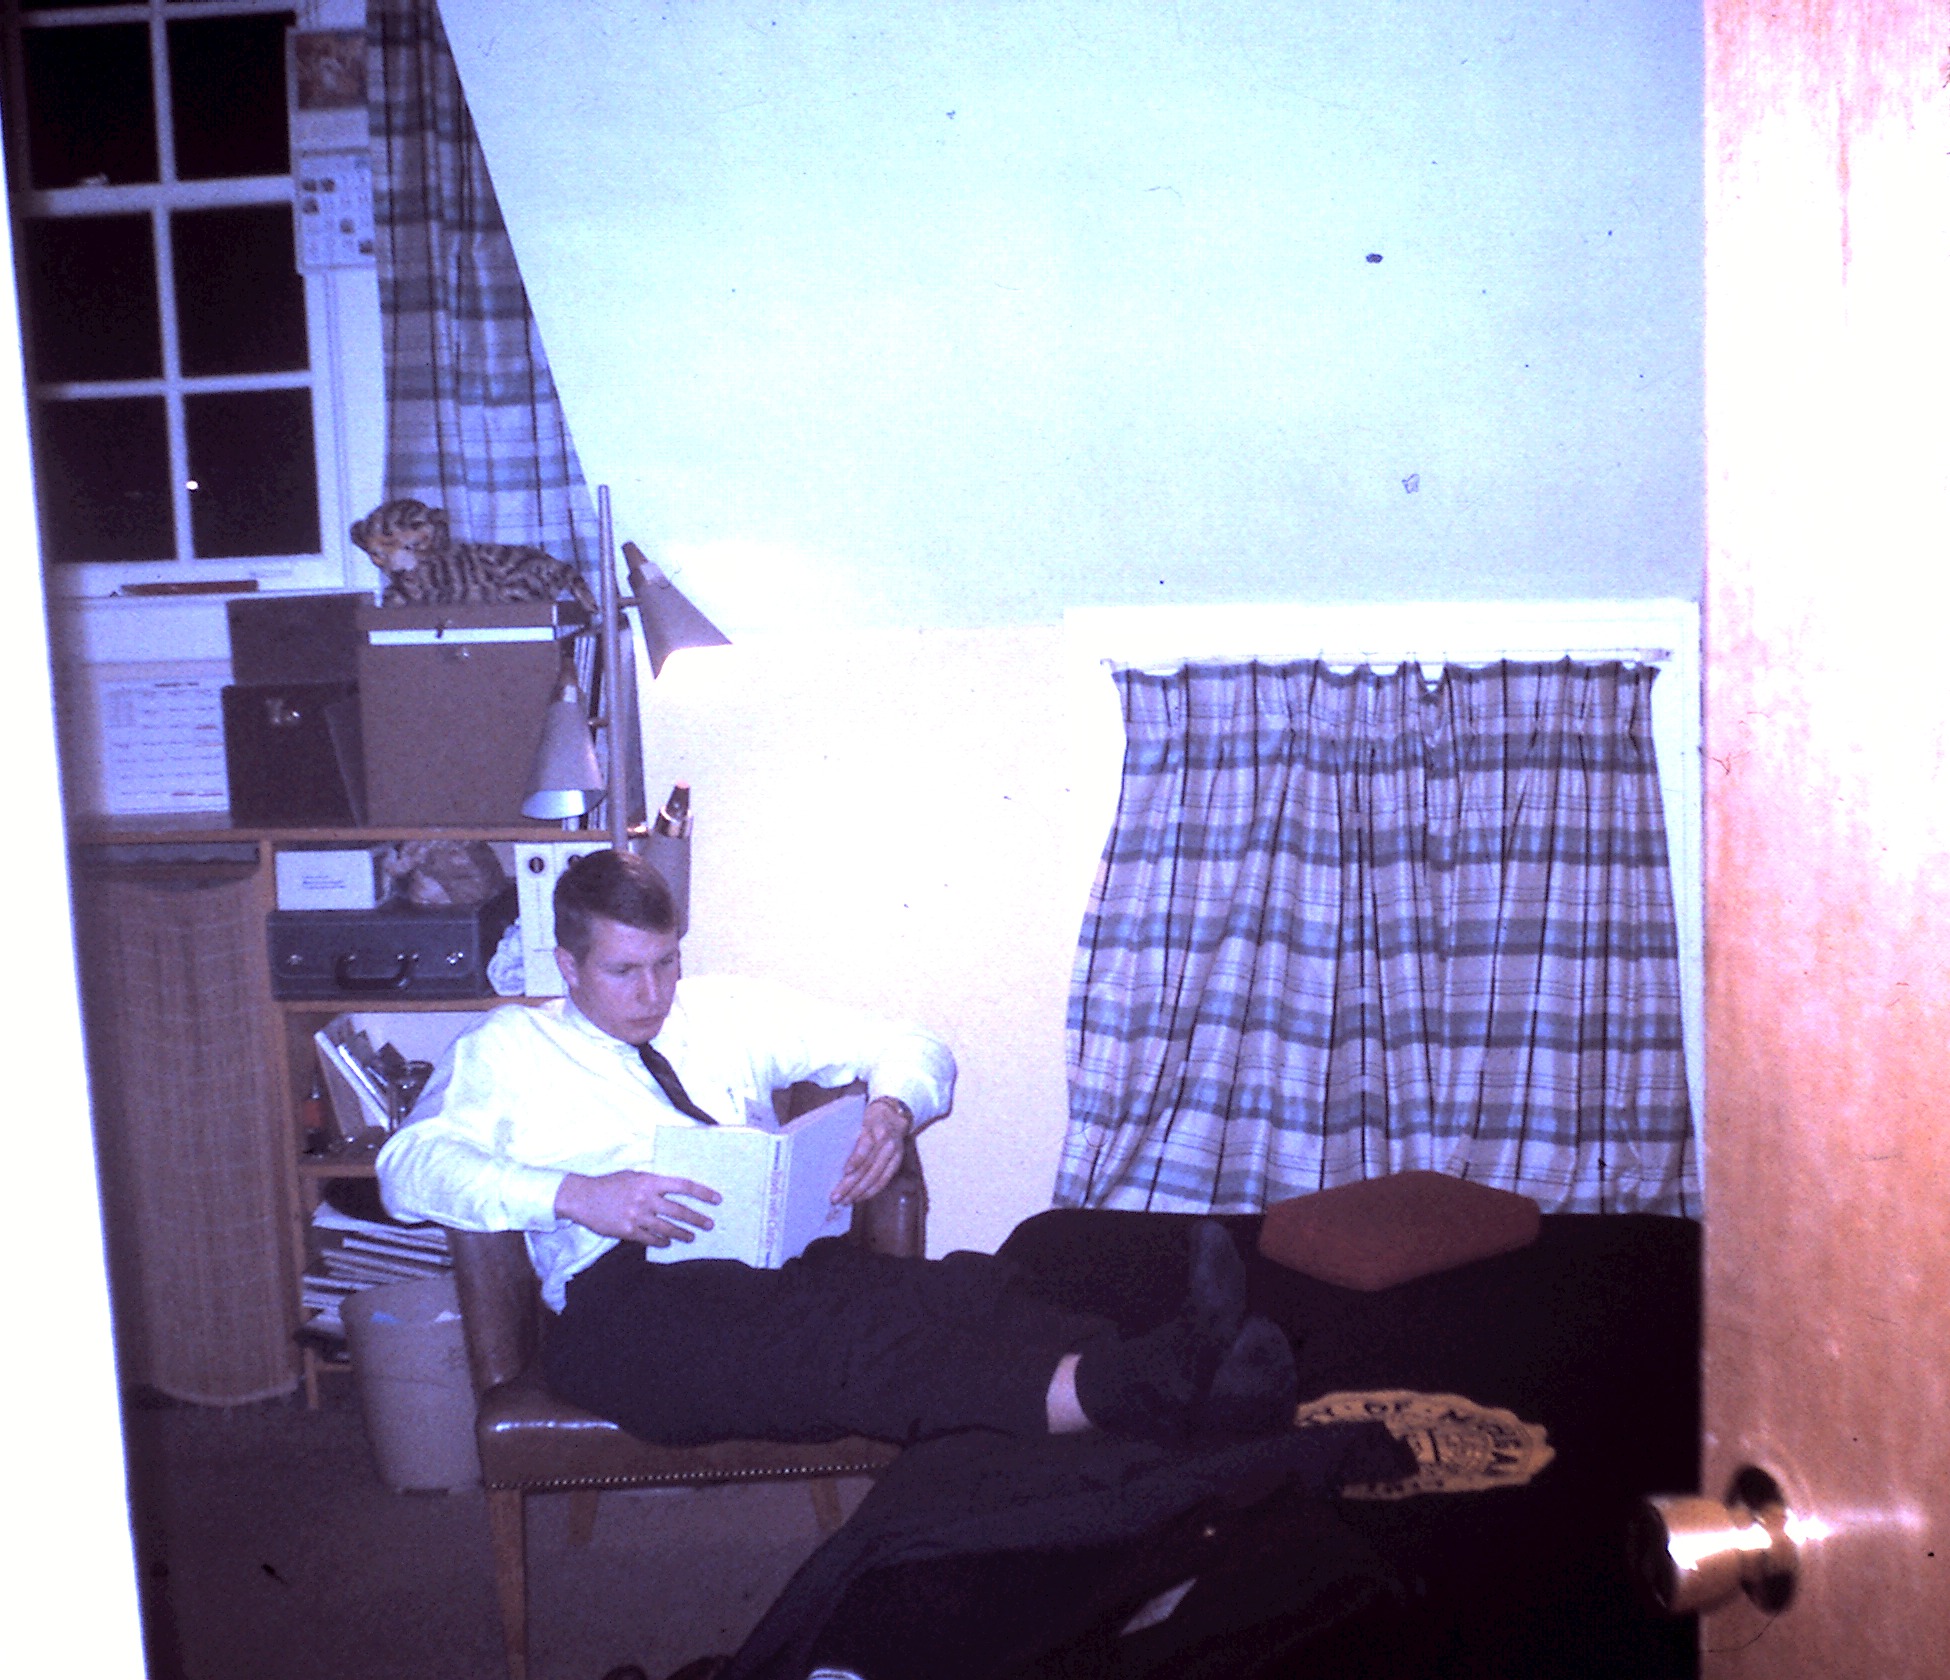  A Sigma brother (possibly John Moorhead ’63) in his room at the chapter house, 1963 